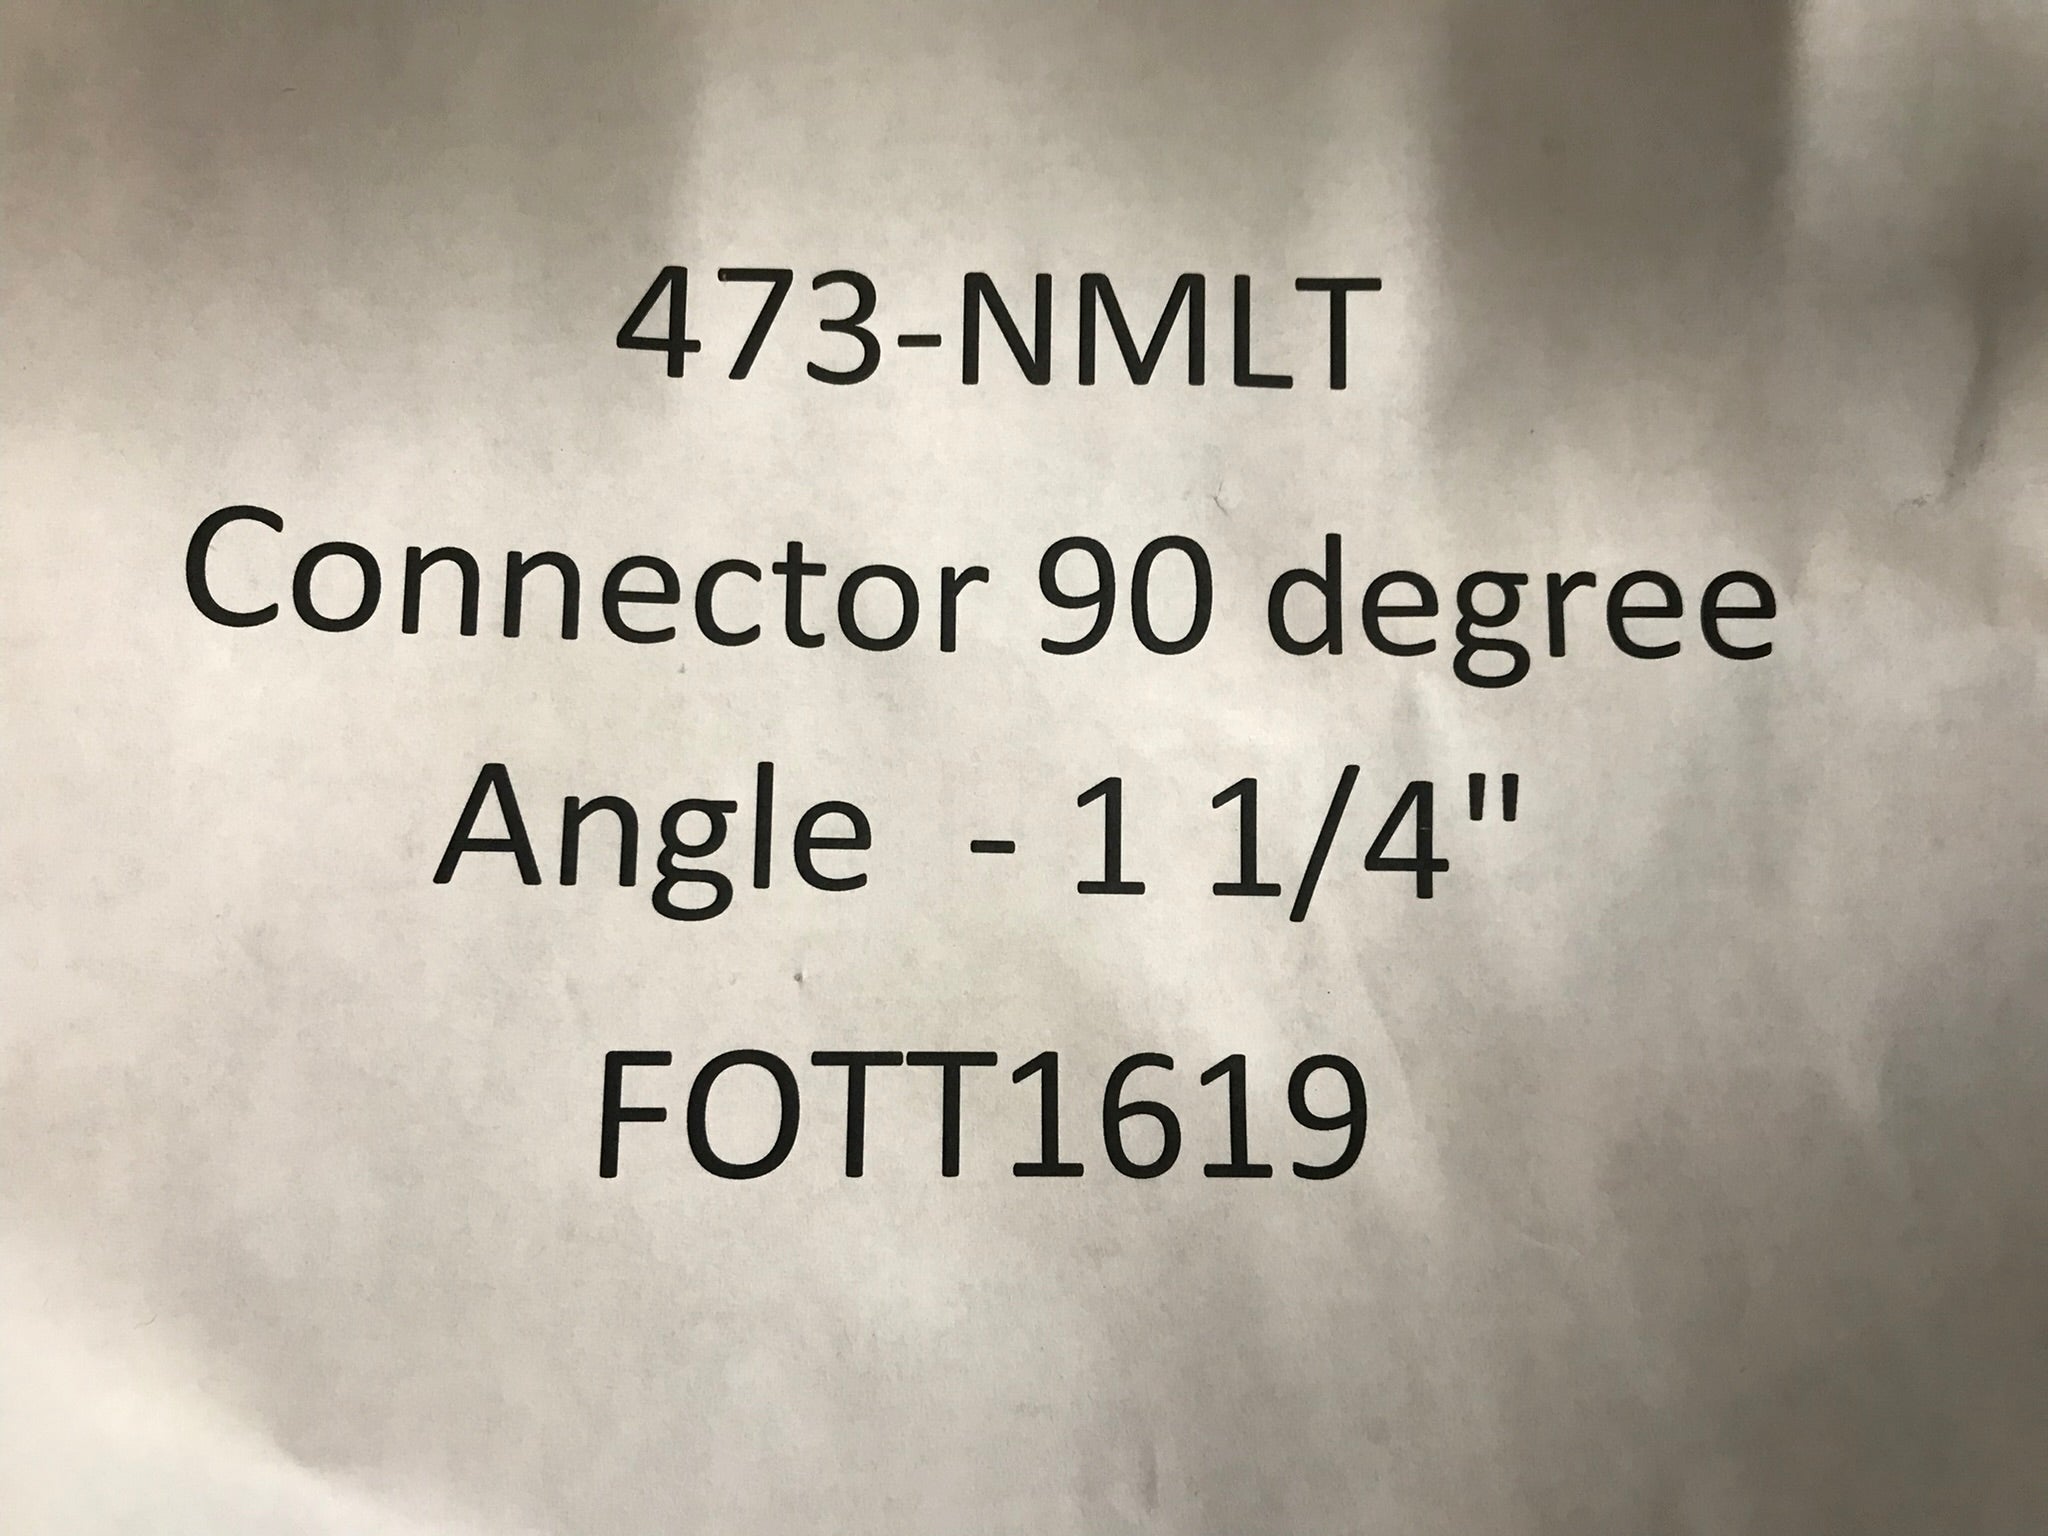 Connector 90 degree Angle - 1 1/4"